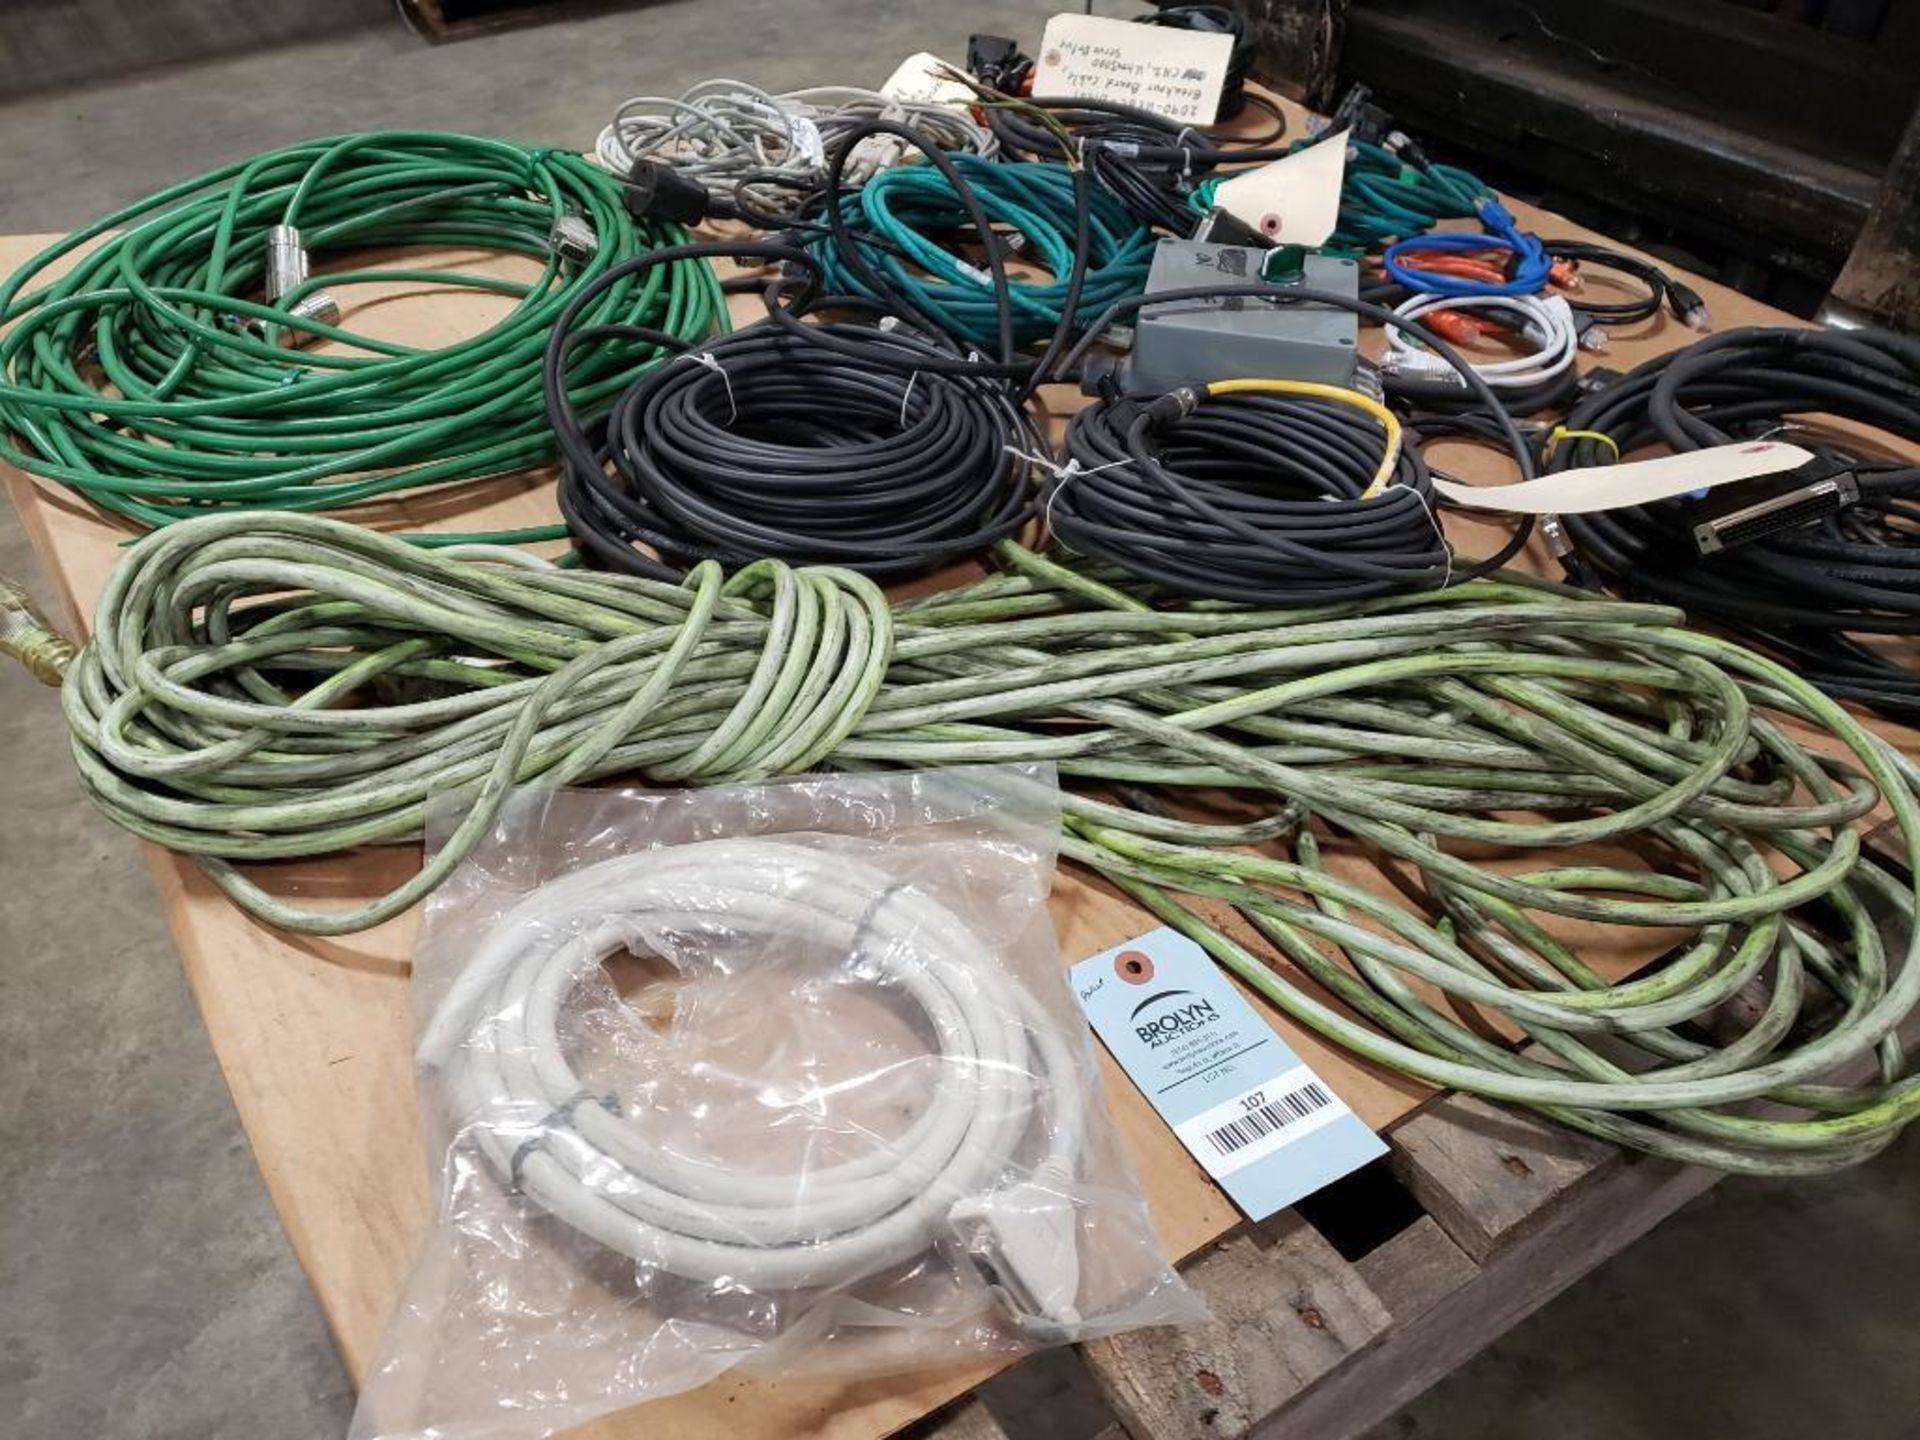 Pallet of assorted electrical connection wires. - Image 9 of 13